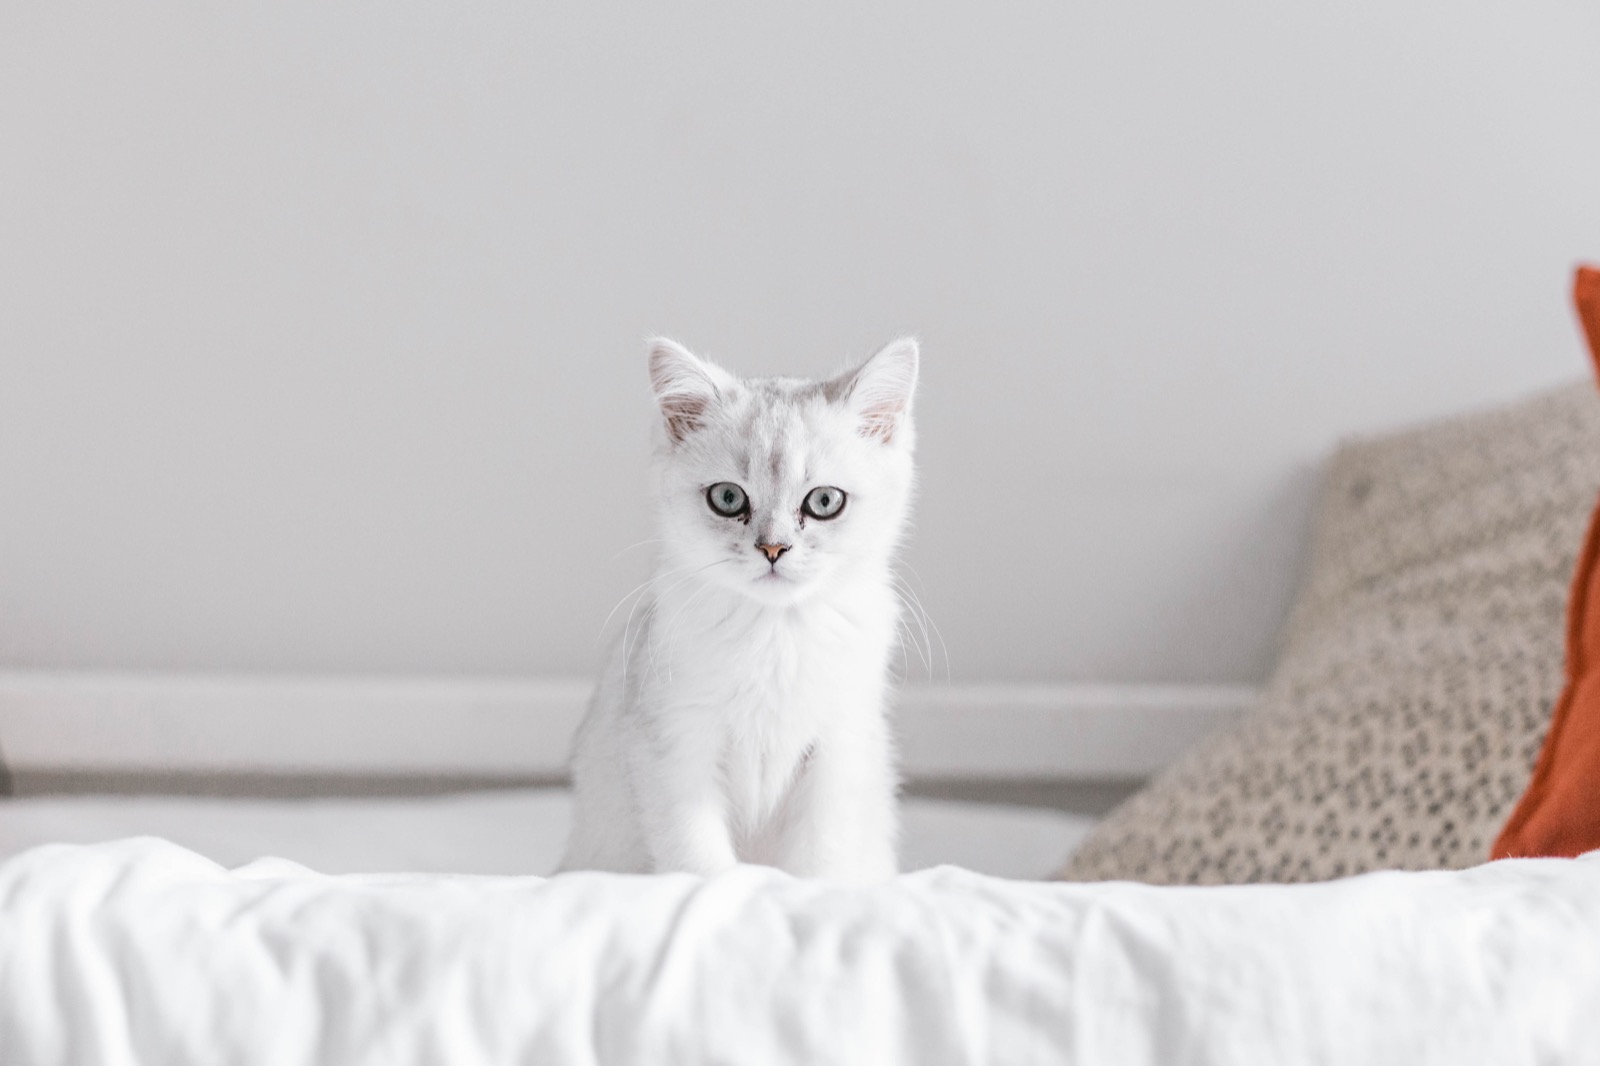 Can You Pass This General Knowledge Quiz While Being Distracted by Adorable Kittens? Cute cat kitten 13